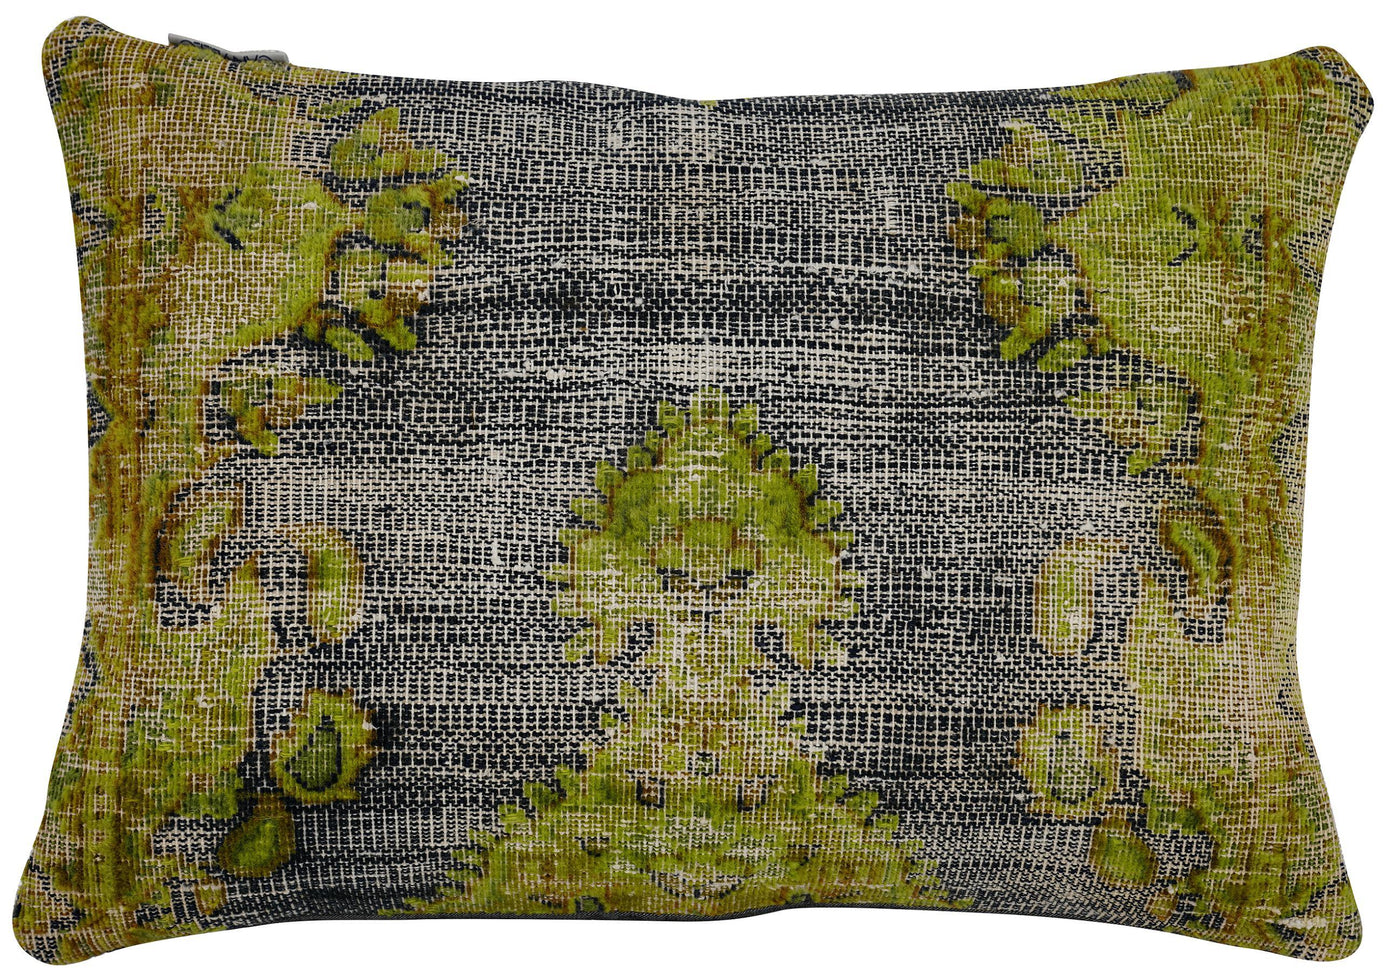 Canvello Antique Rug Olive Green Pillows - 16"x24"